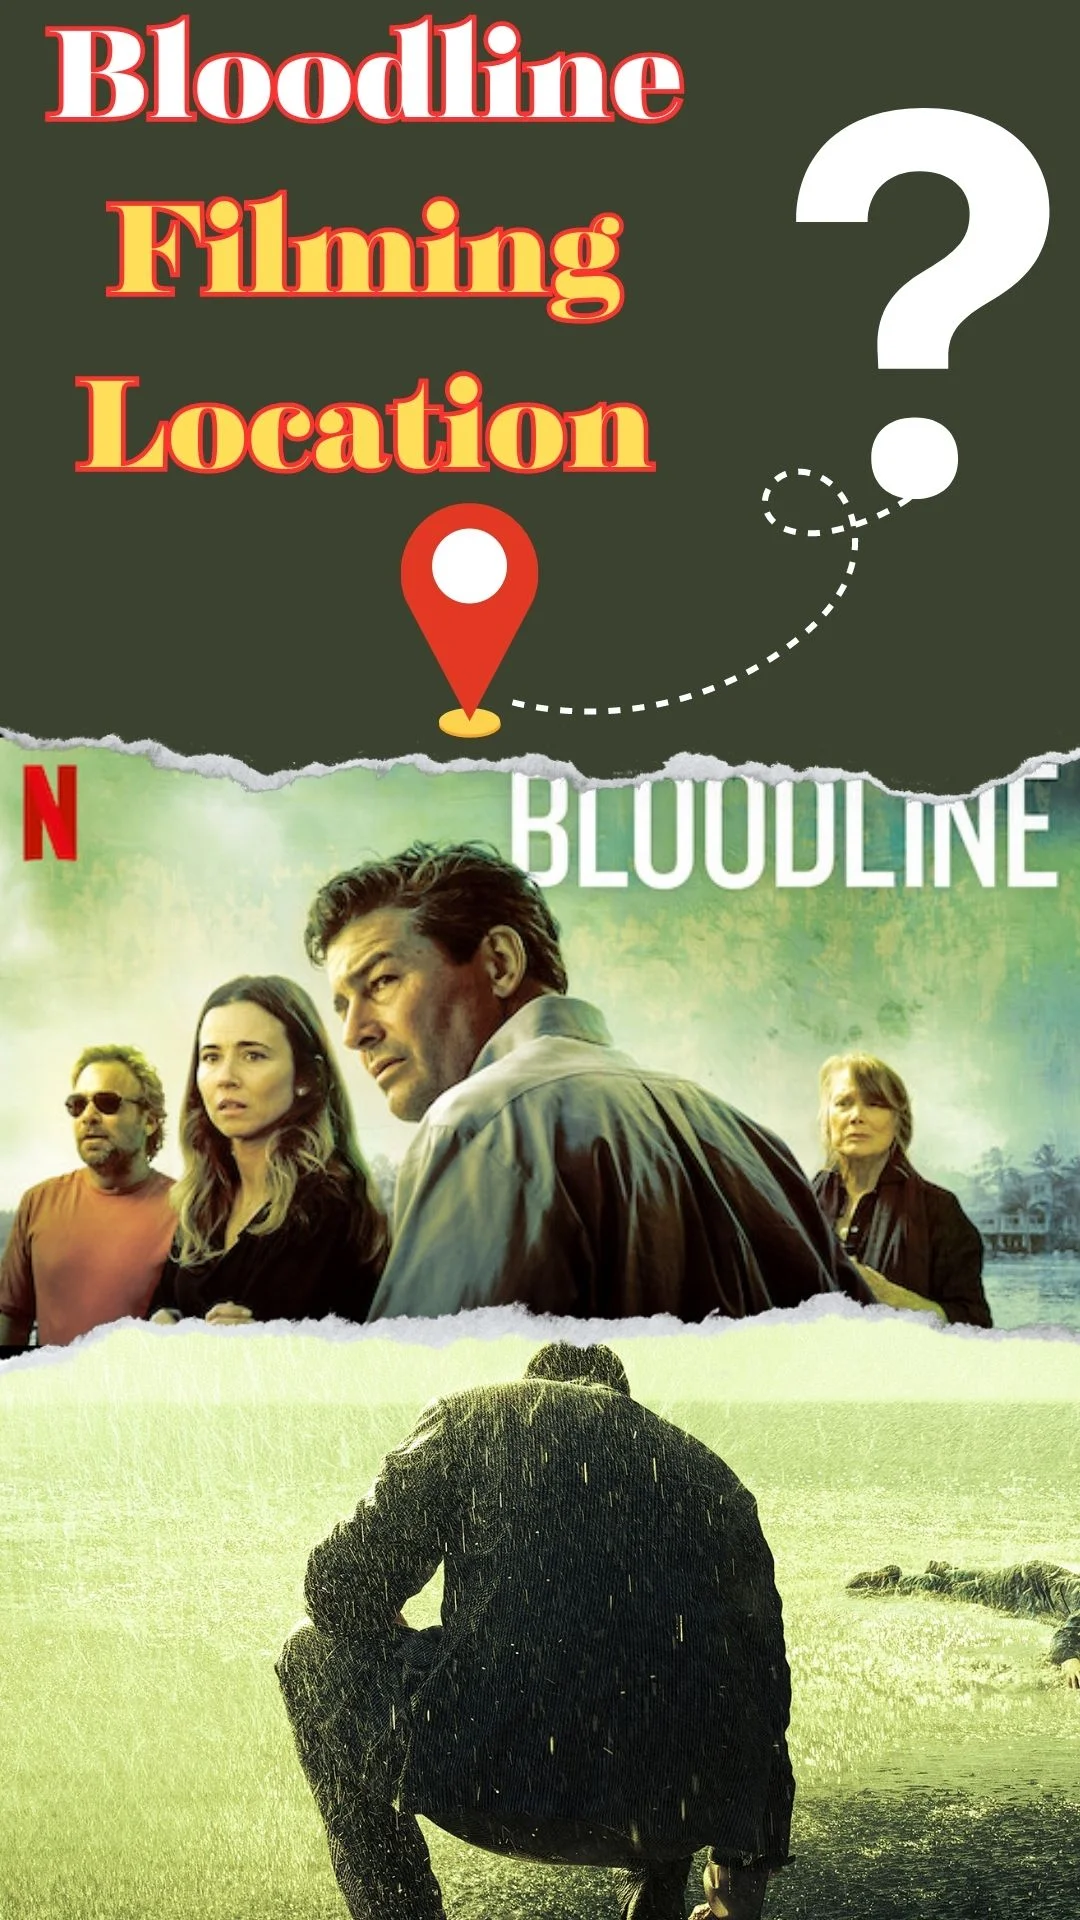 Bloodline Filming Locations